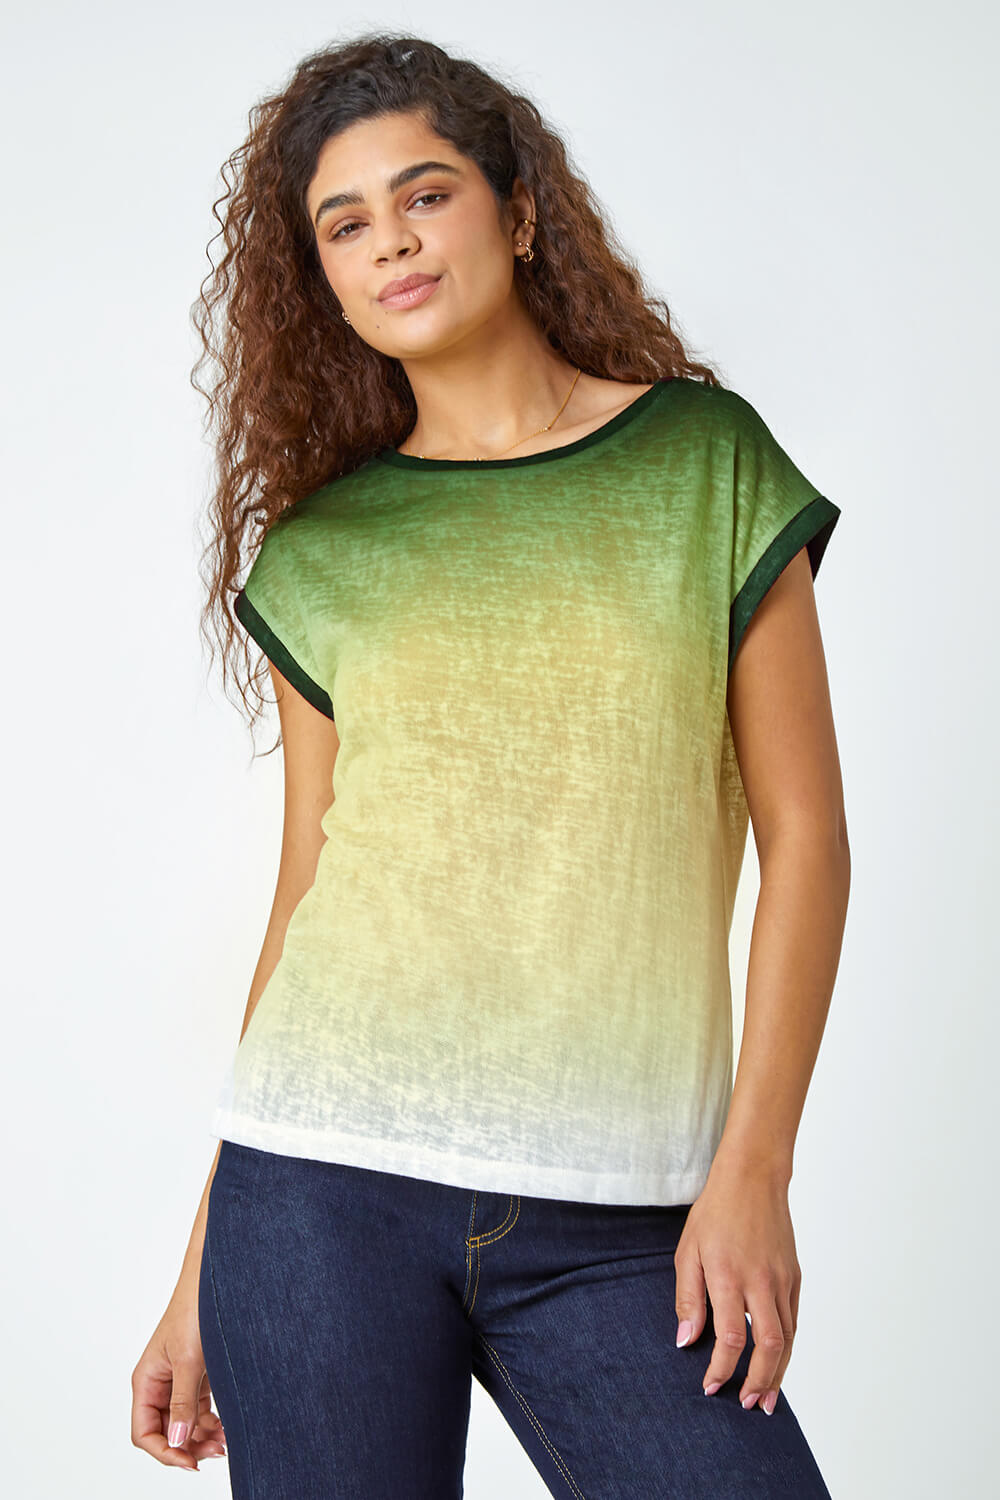 Green Ombre Print Stretch T-Shirt, Image 4 of 5